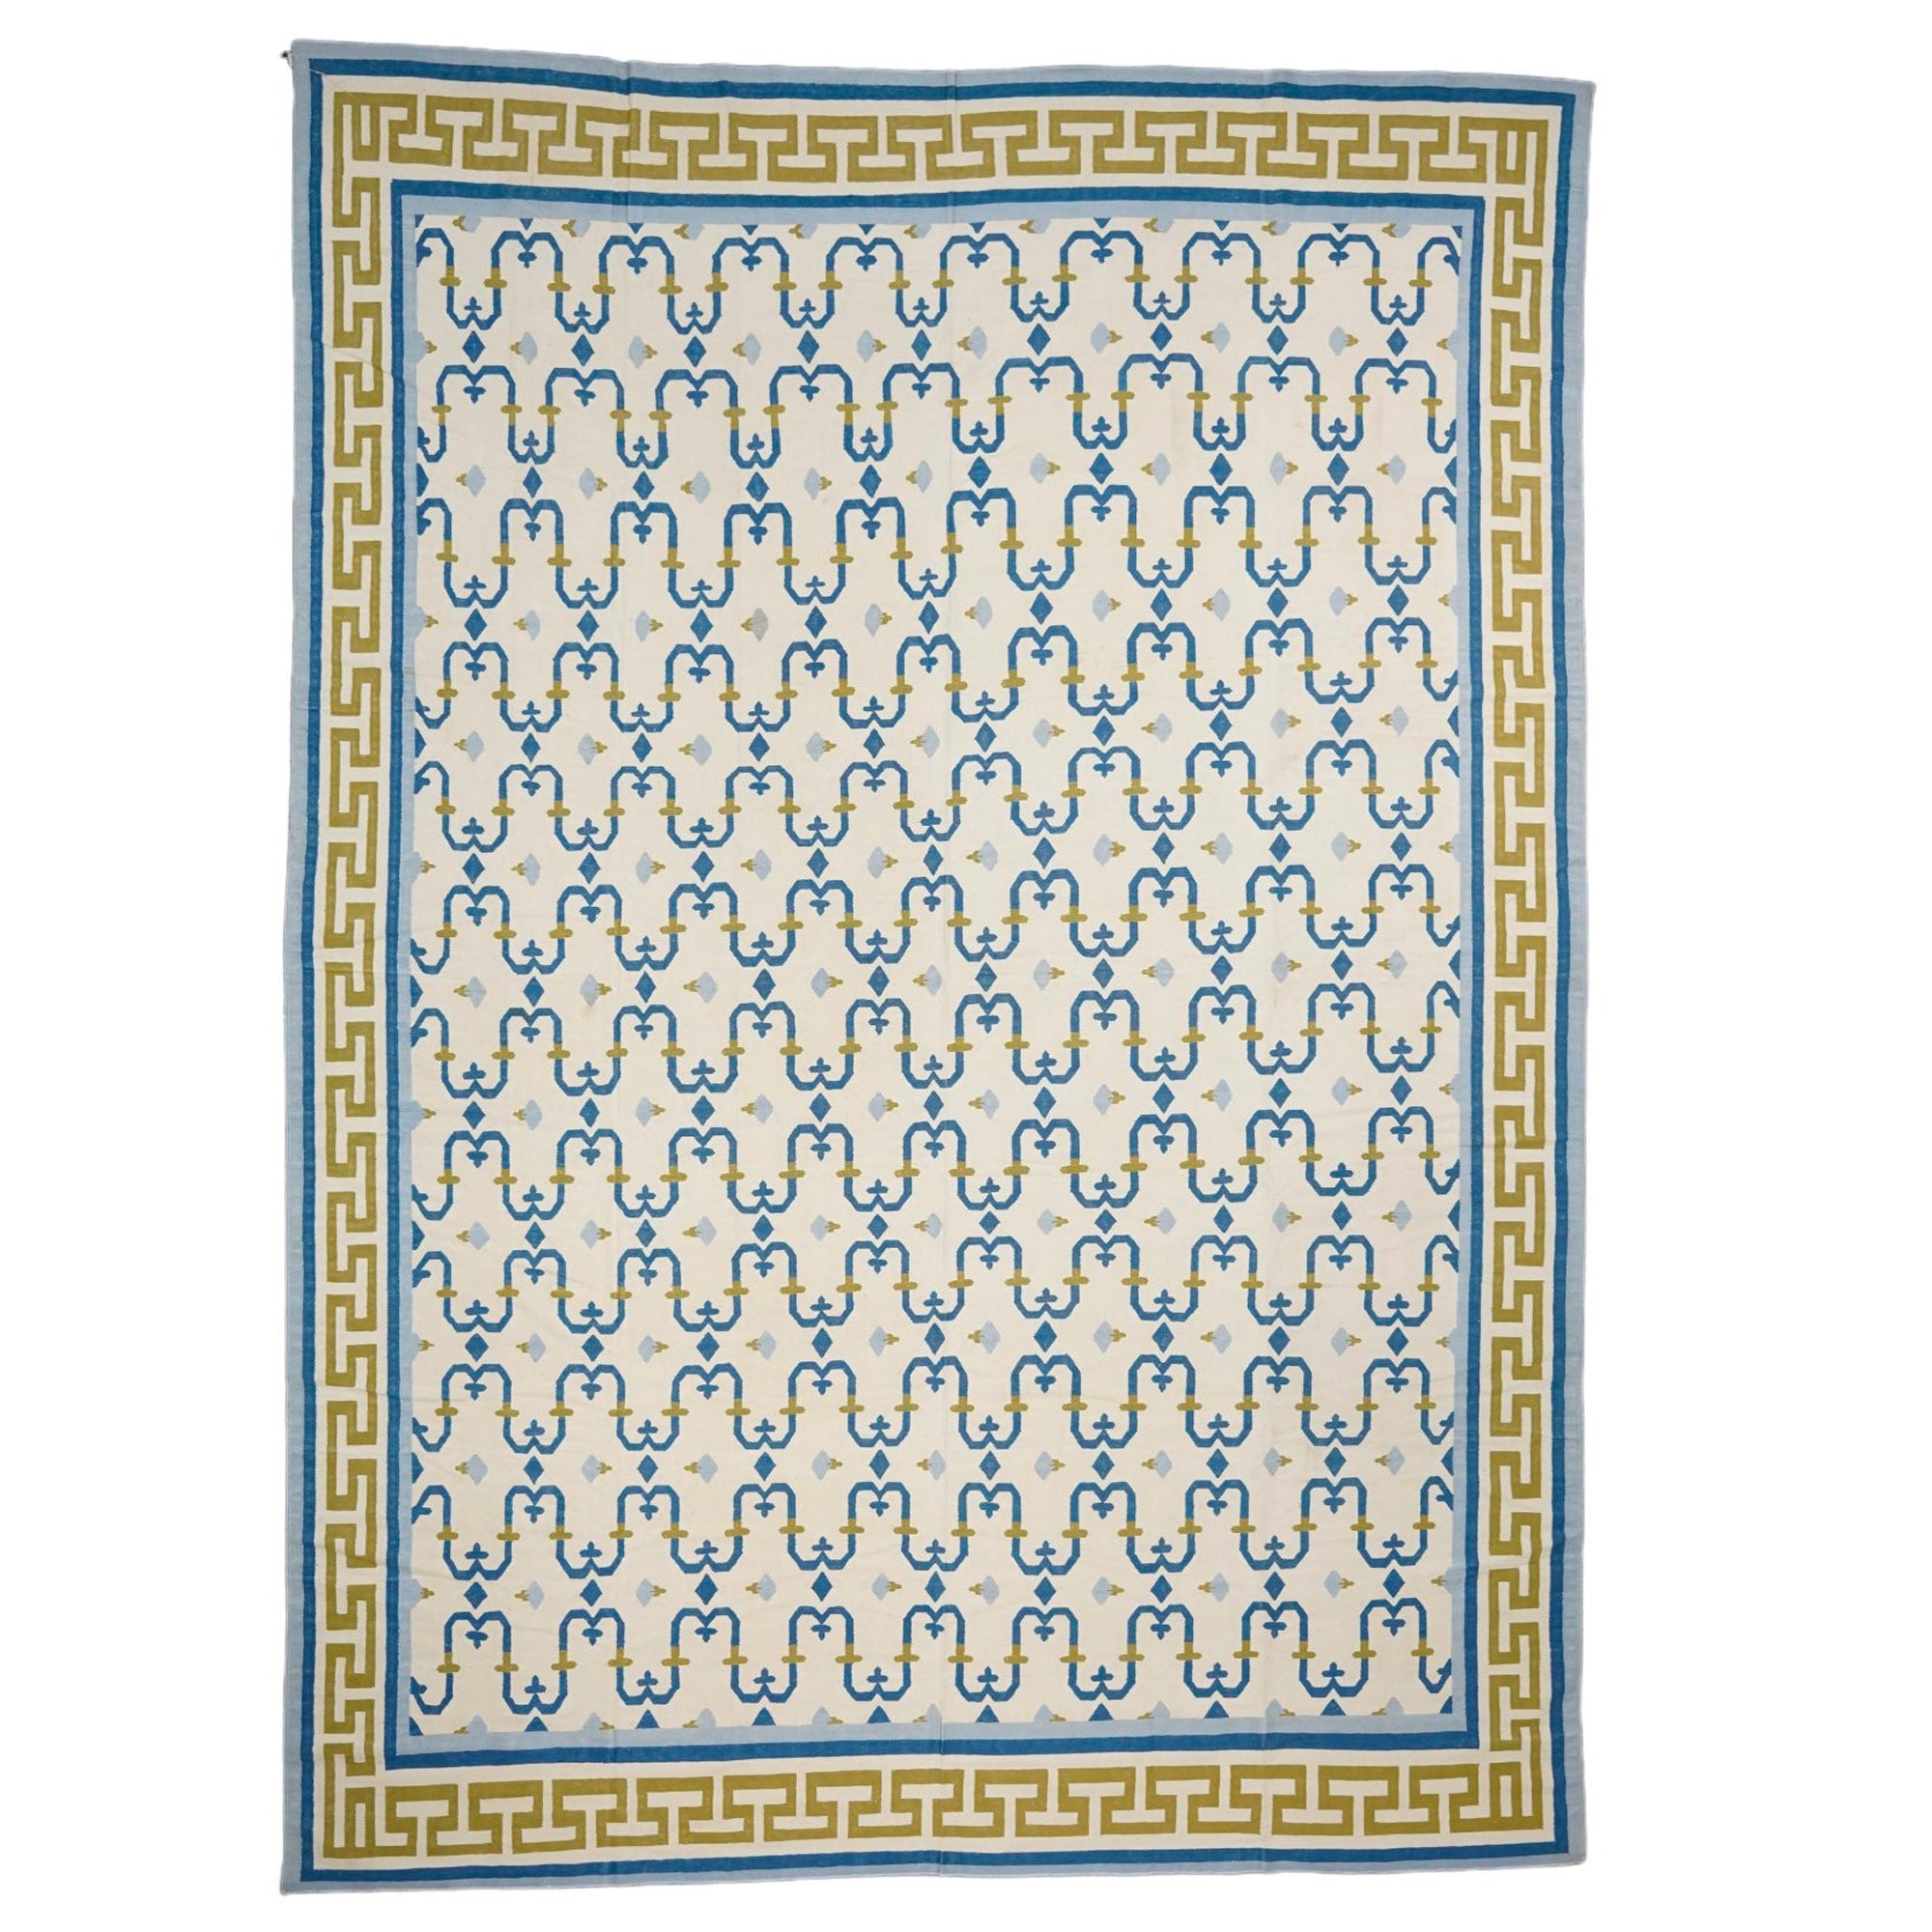 Vintage Dhurrie Rug with Blue and Gold Geometric Pattern, from Rug & Kilim